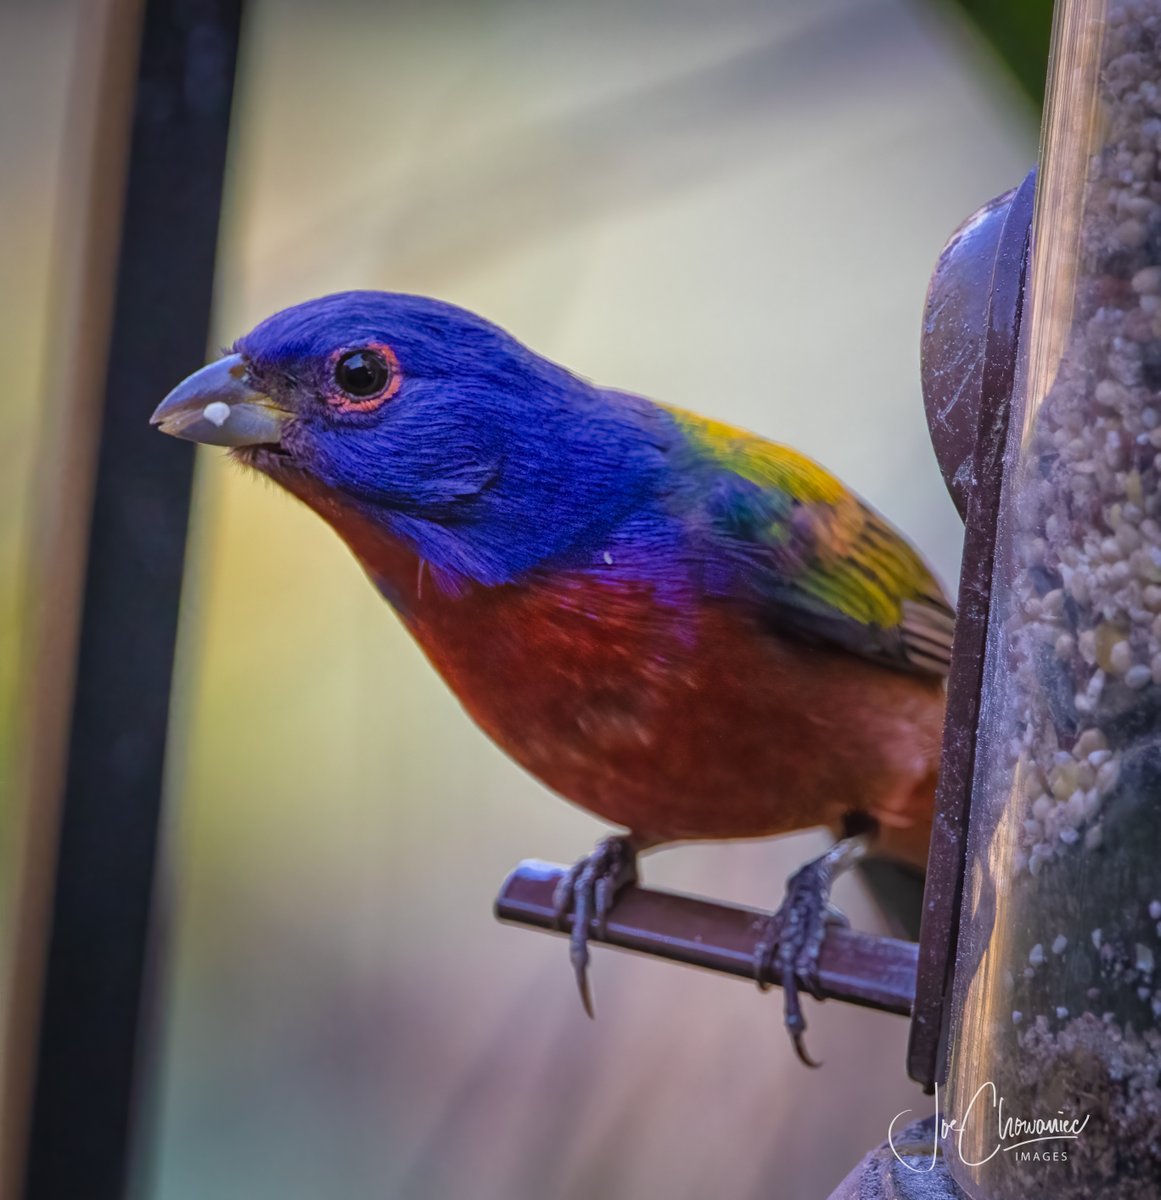 Simply the prettiest bird from our Florida trip & easily the prettiest bird we have seen.   The female & male painted bunting.  French name of the Painted Bunting, nonpareil, means “without equal”.   #bird #nature #wildlife #wow #canon #bunting #color #colours #birds